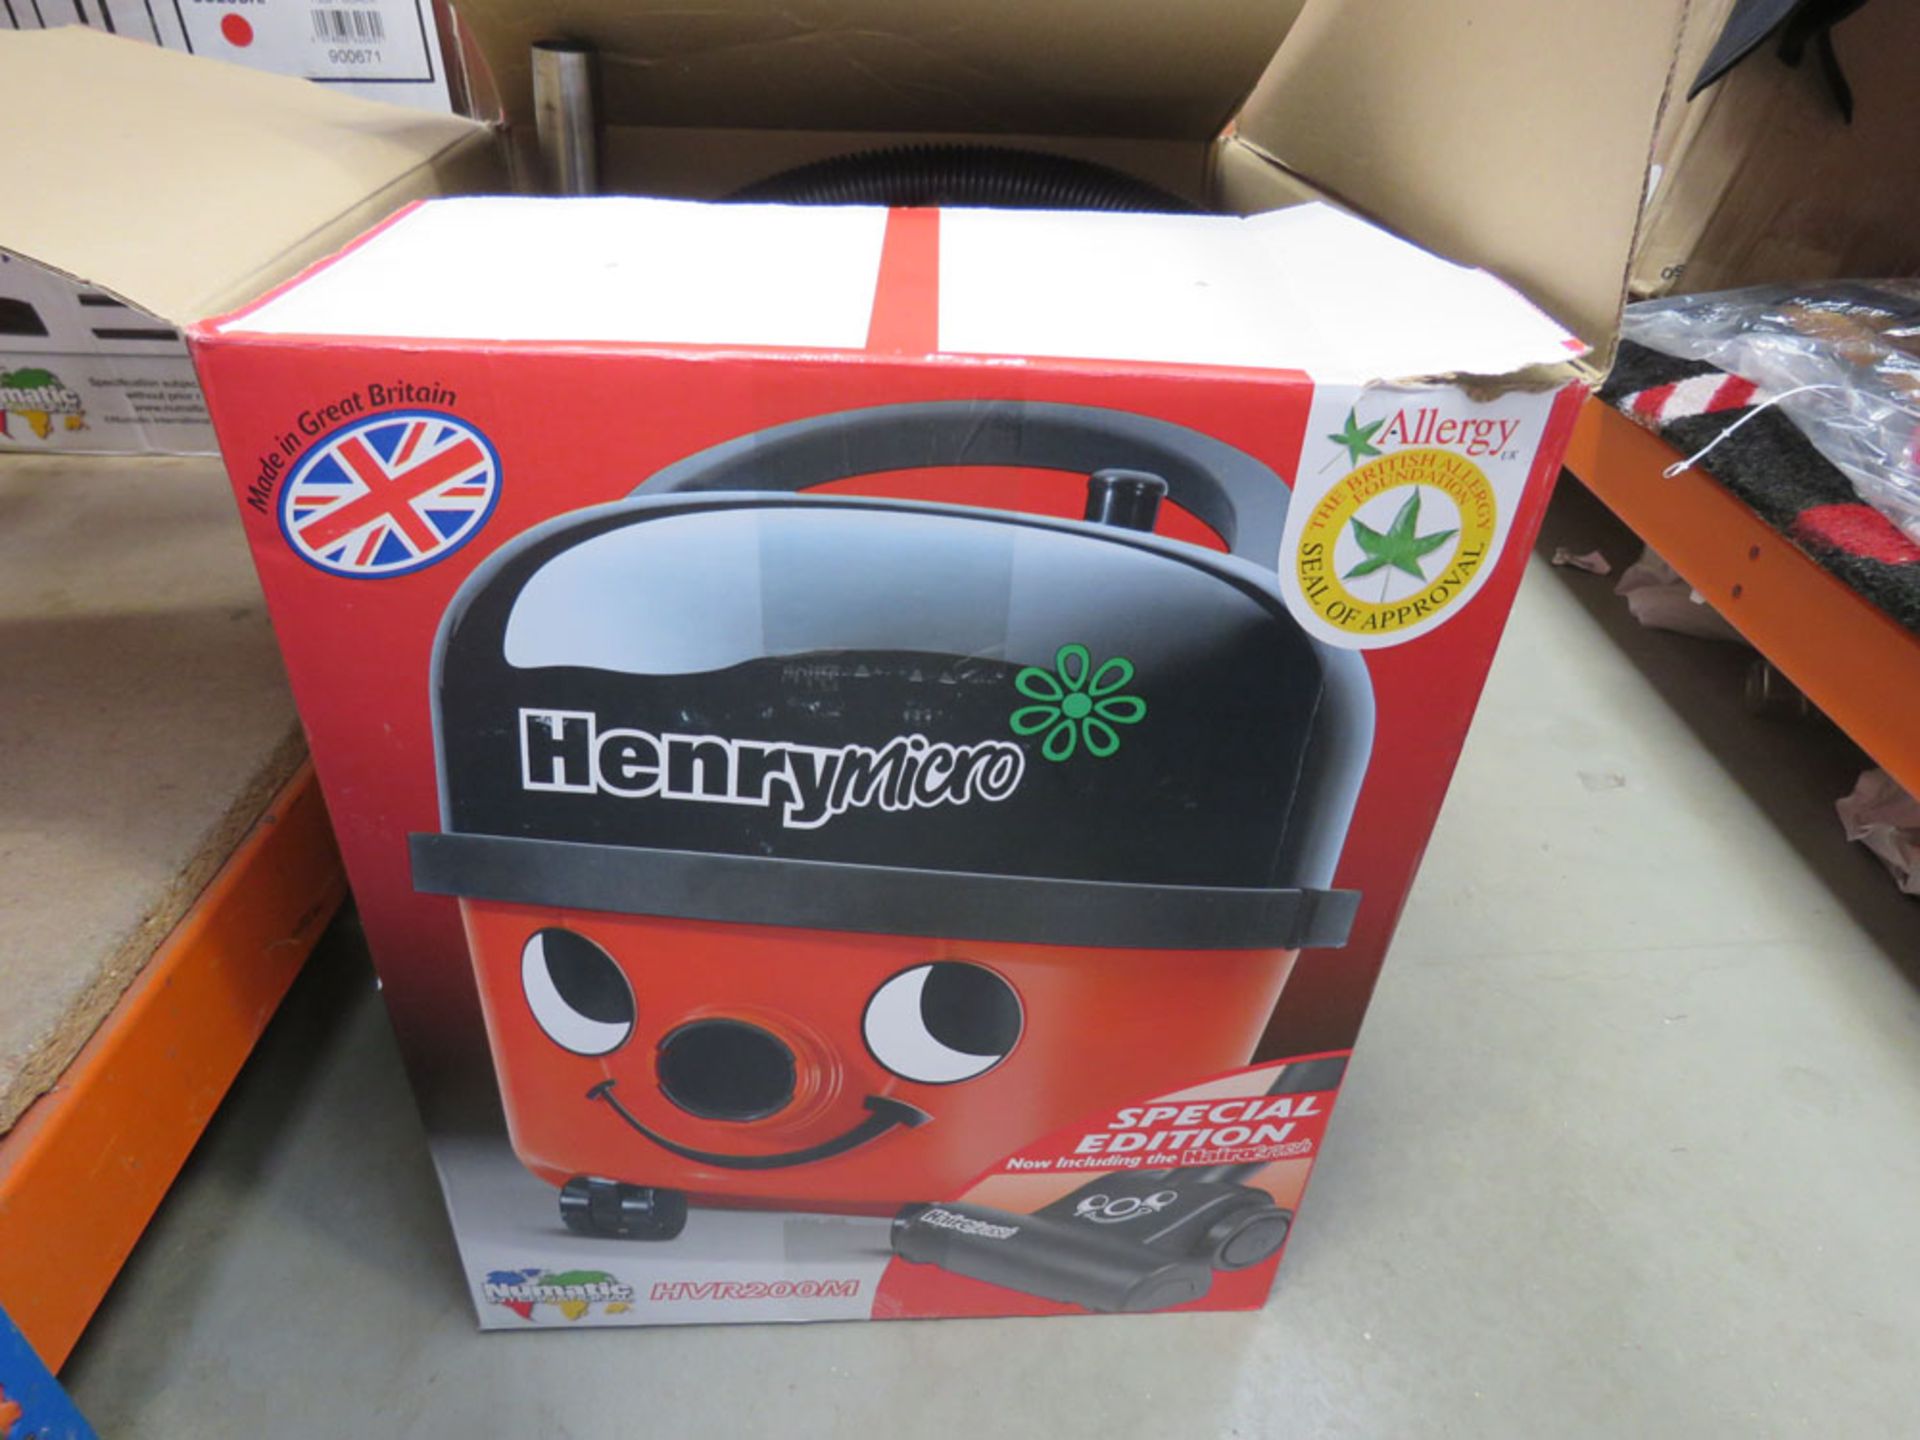 Henry Micro vacuum cleaner with pole and box - Image 2 of 2